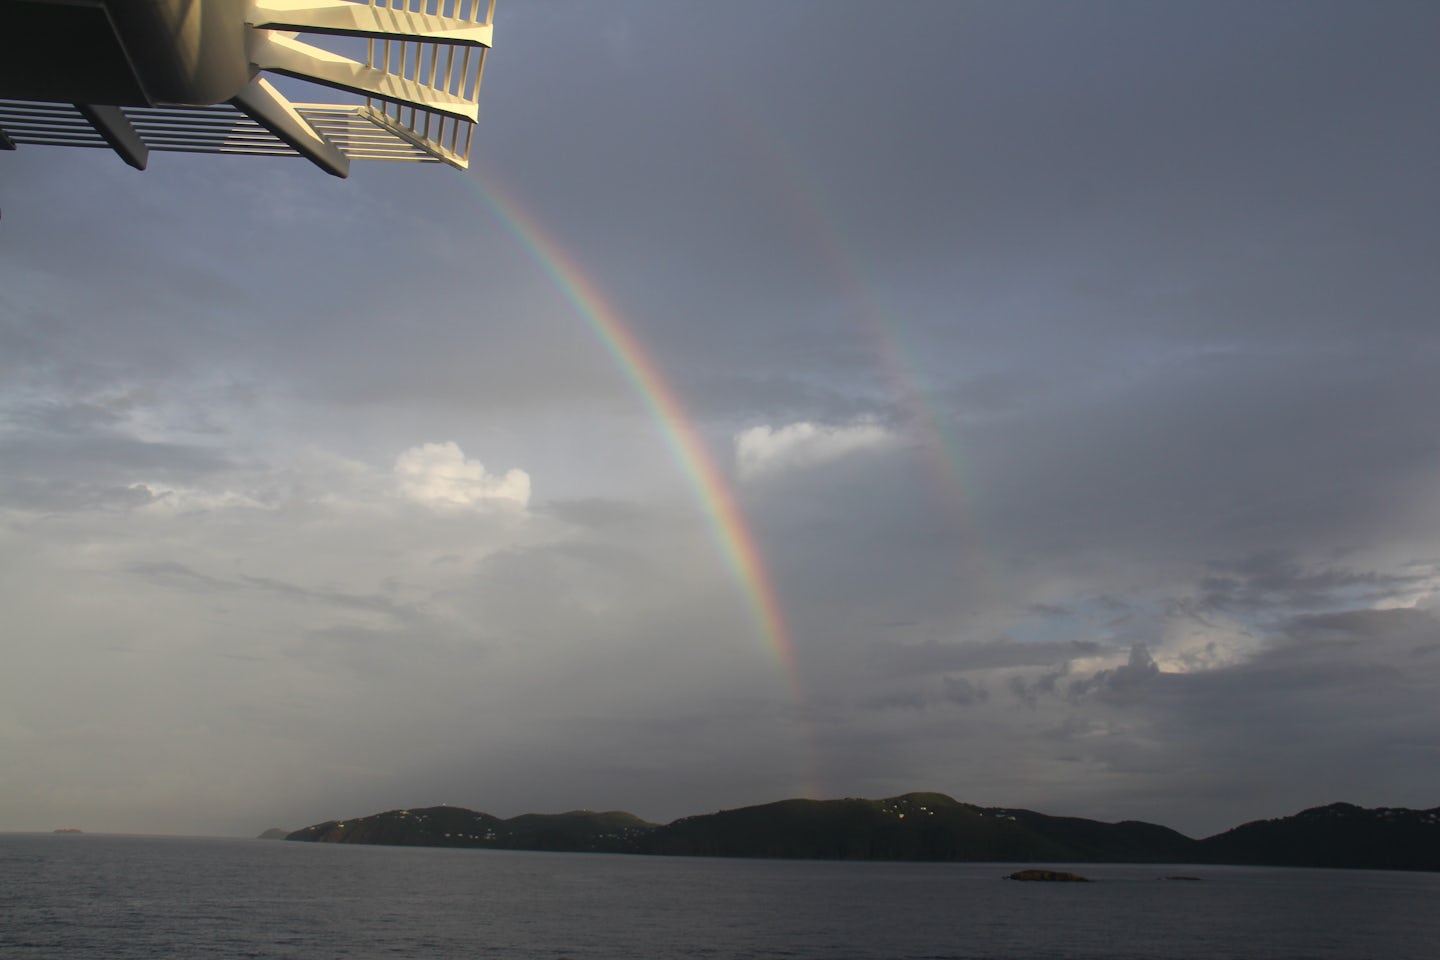 A rainbow as we arrived in St. Thomas